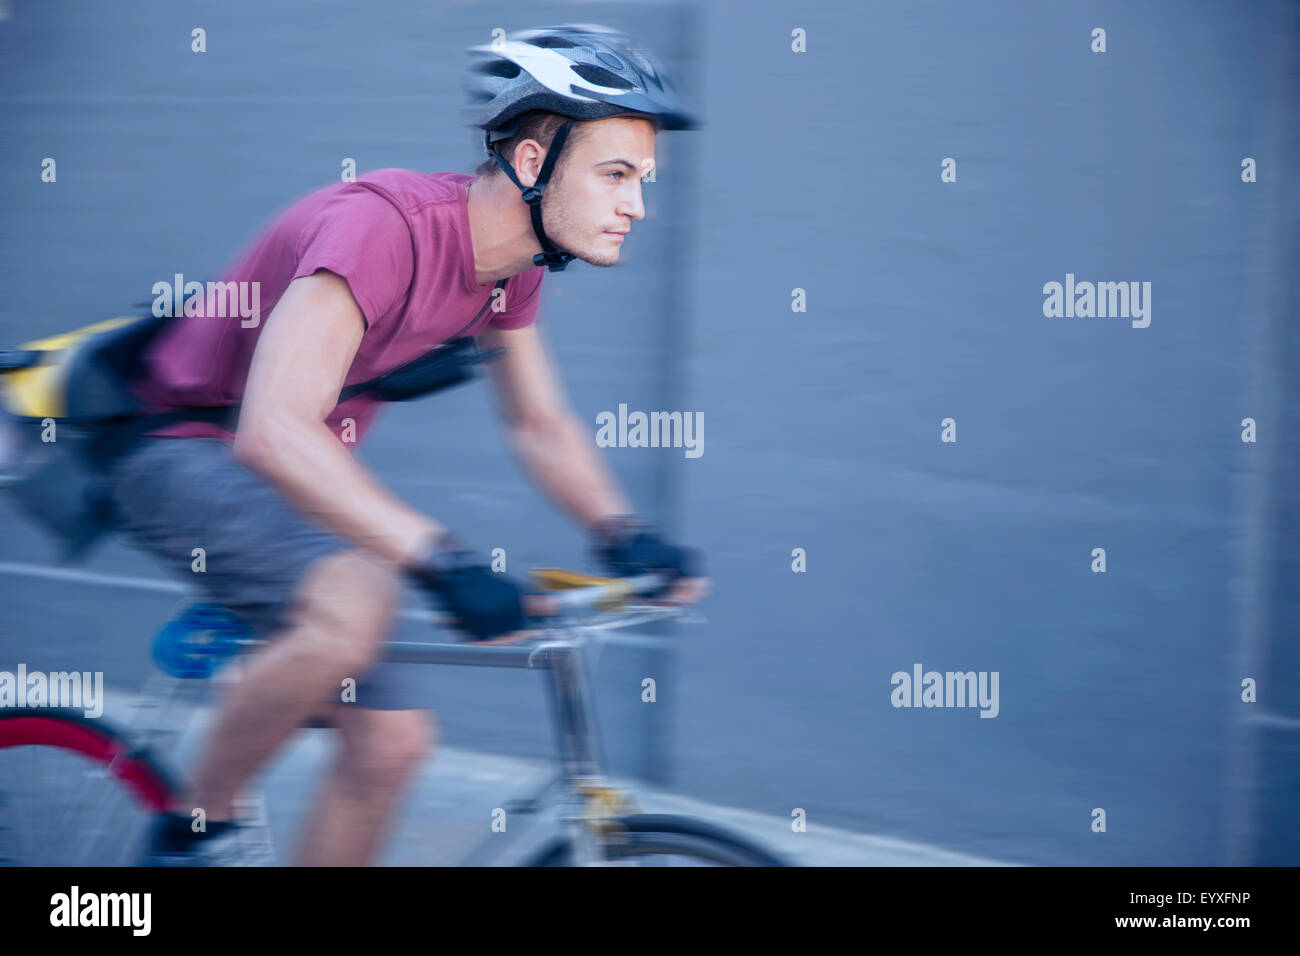 Focused bicycle messenger with helmet on the move Stock Photo